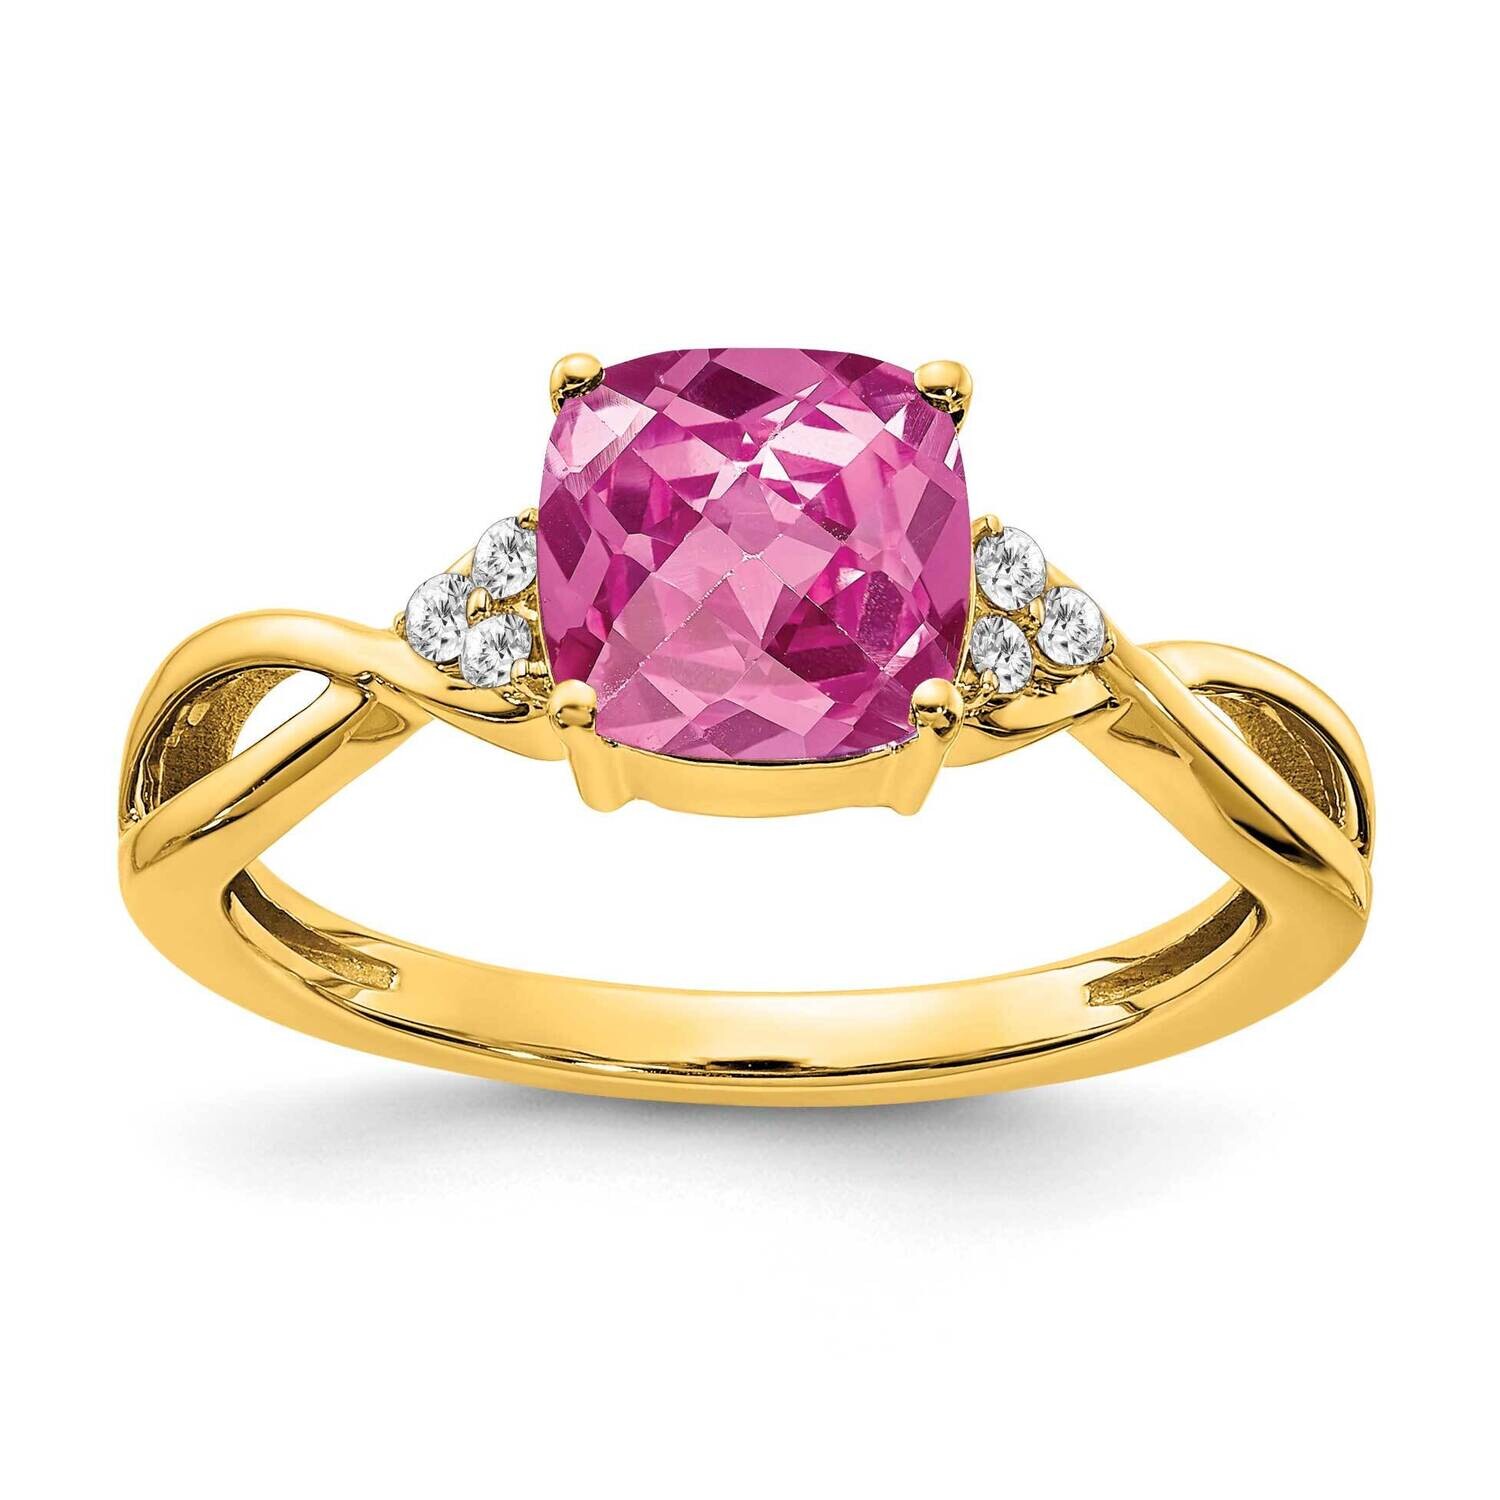 Checkerboard Created Pink Sapphire Diamond Ring 10k Gold RM4393-CPS-006-1YA